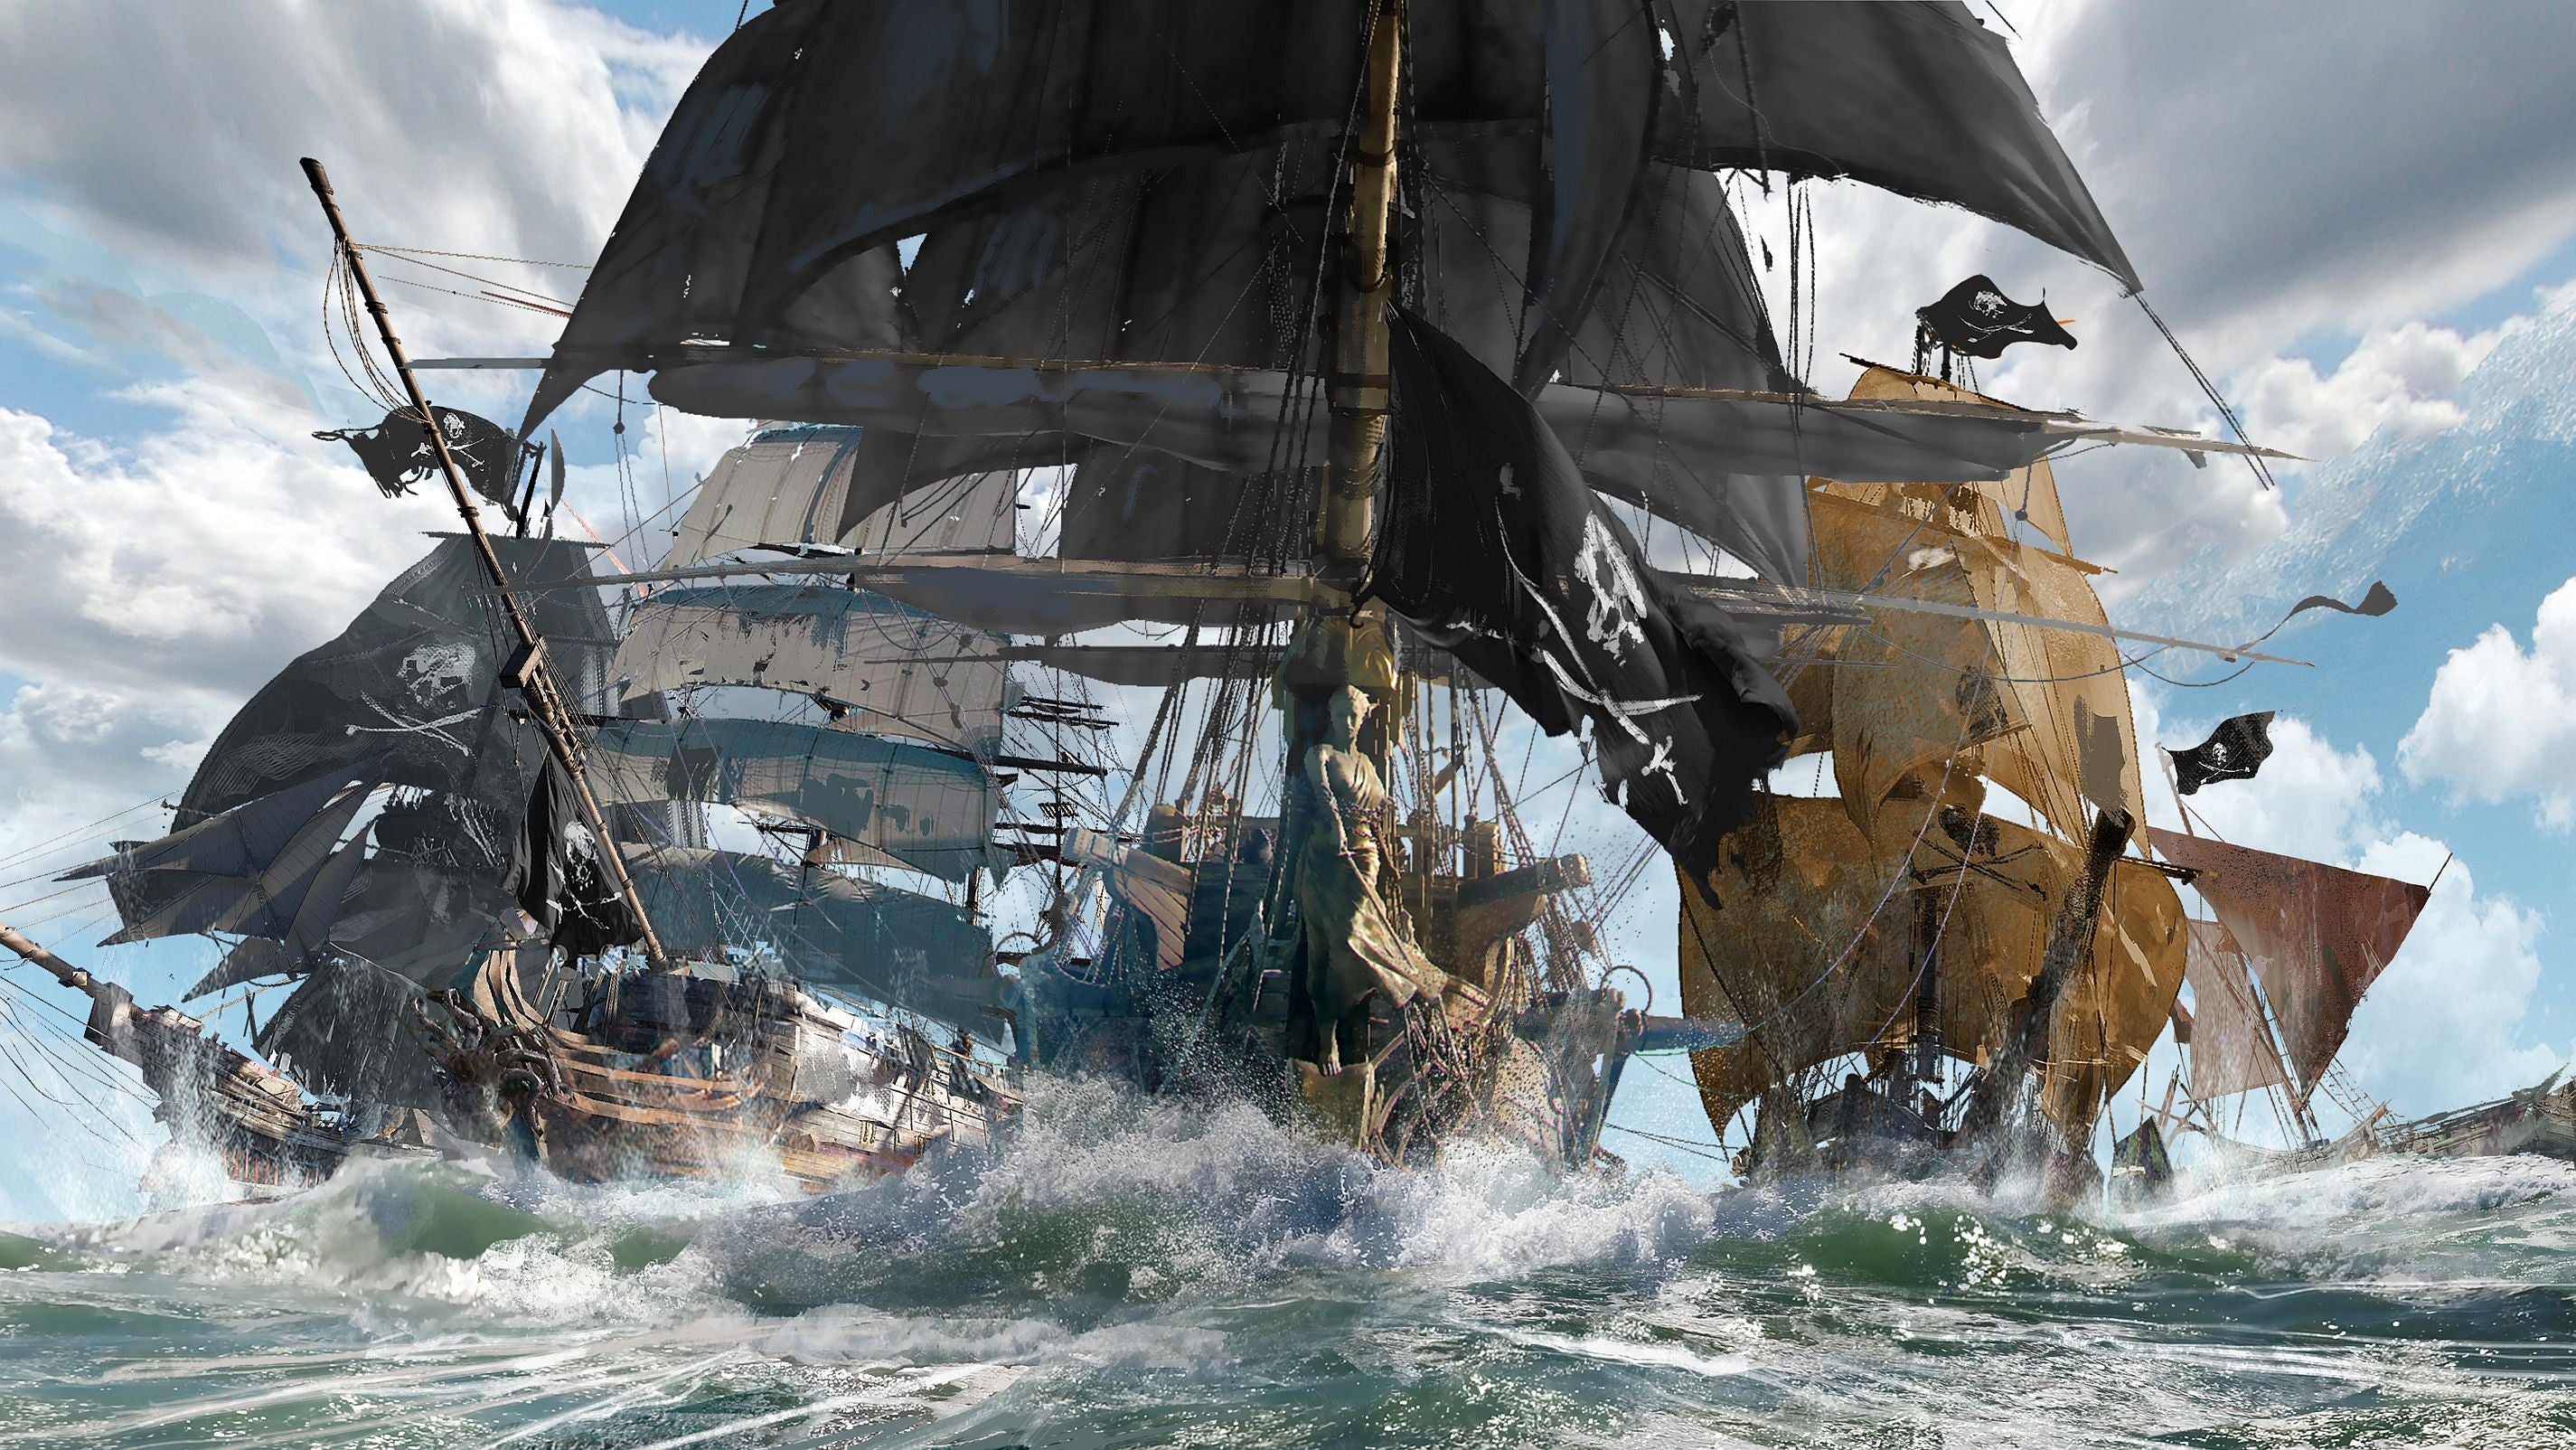 Image for New Skull and Bones footage shows off "narrative gameplay"